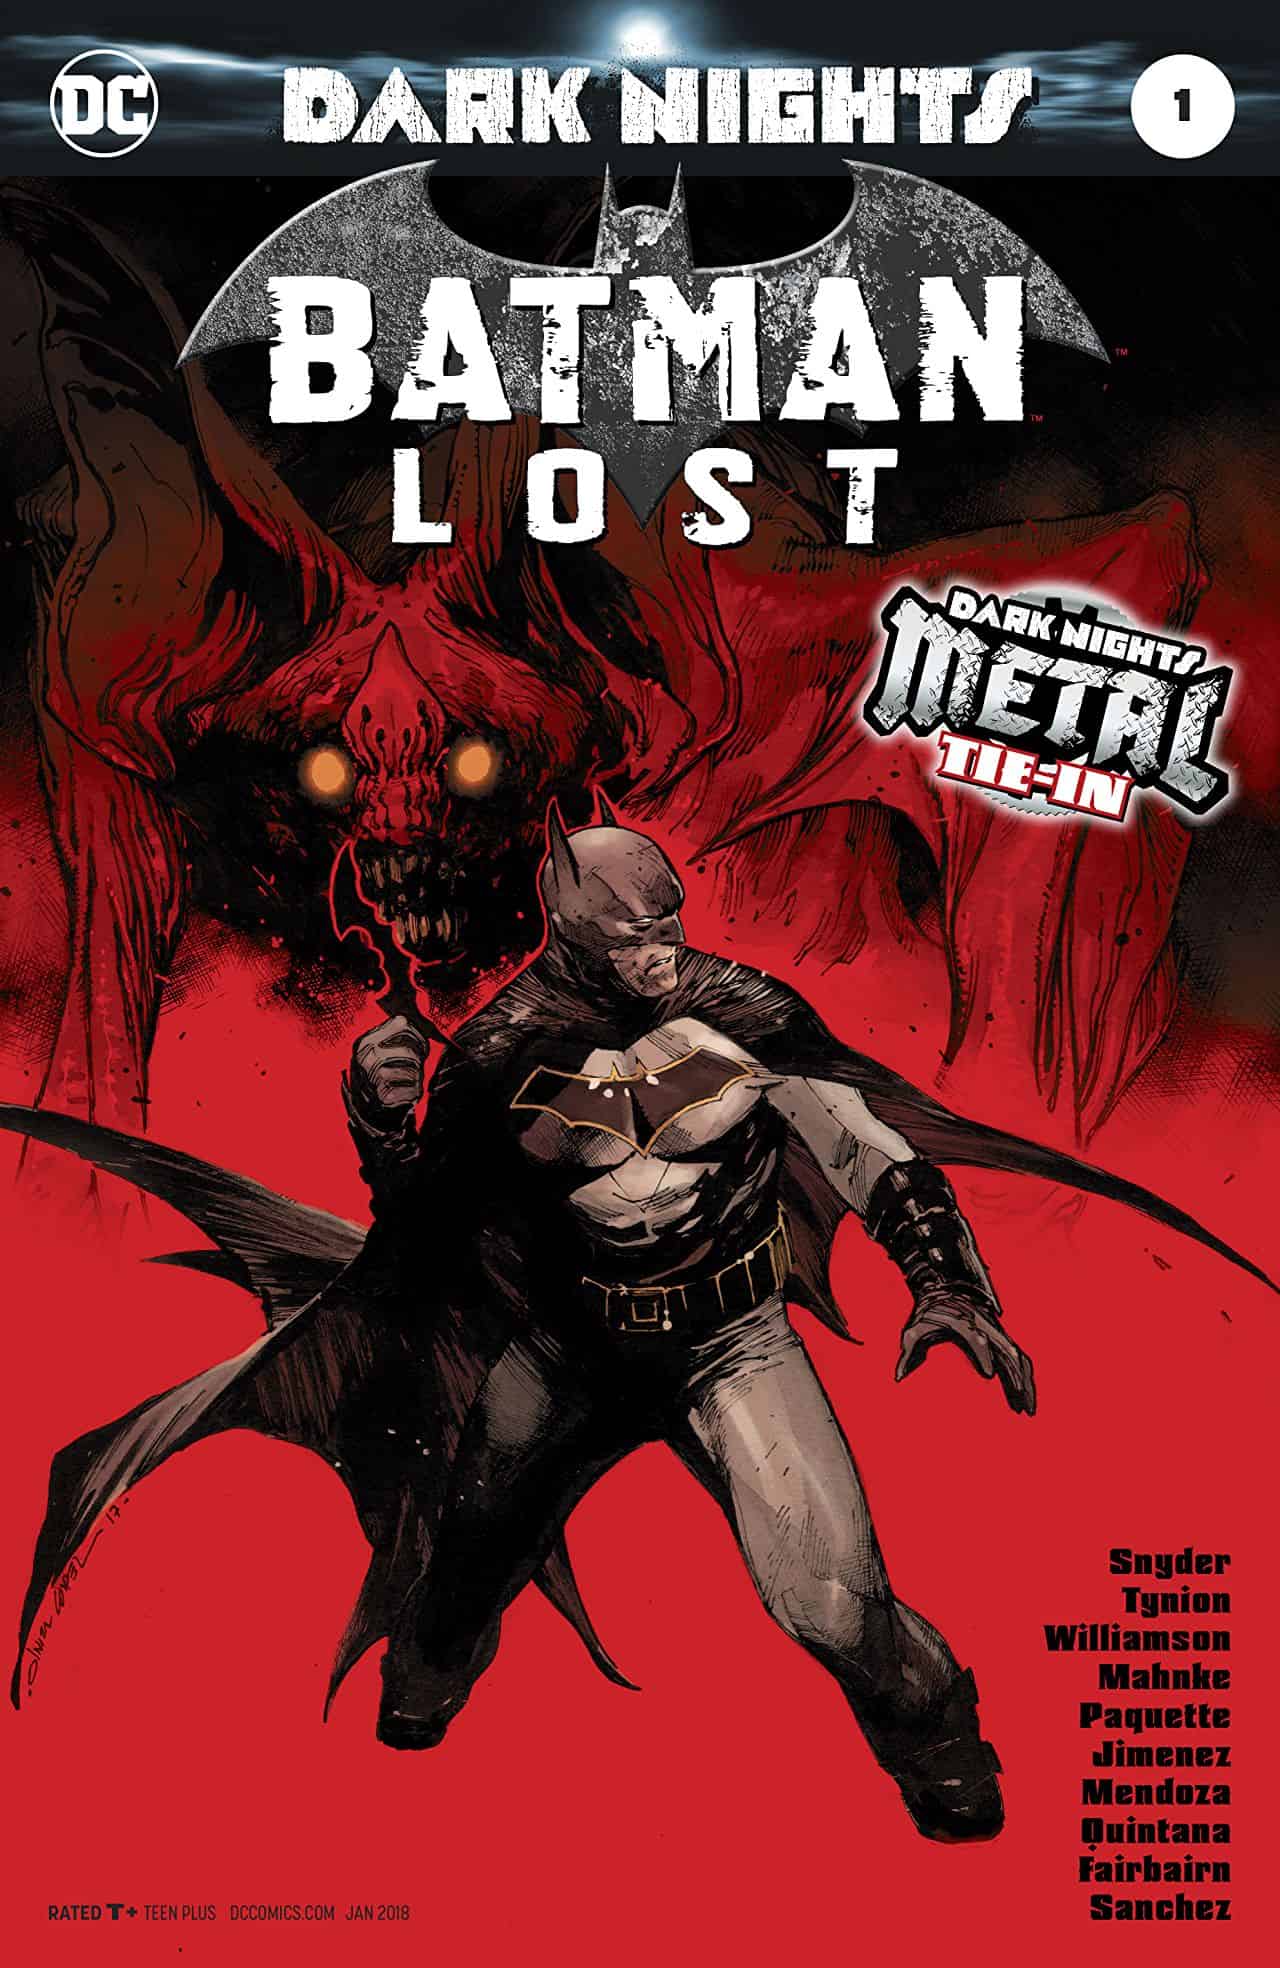 Lost in the Nightmare! (Batman Lost #1 Comic Review) - Comic Watch